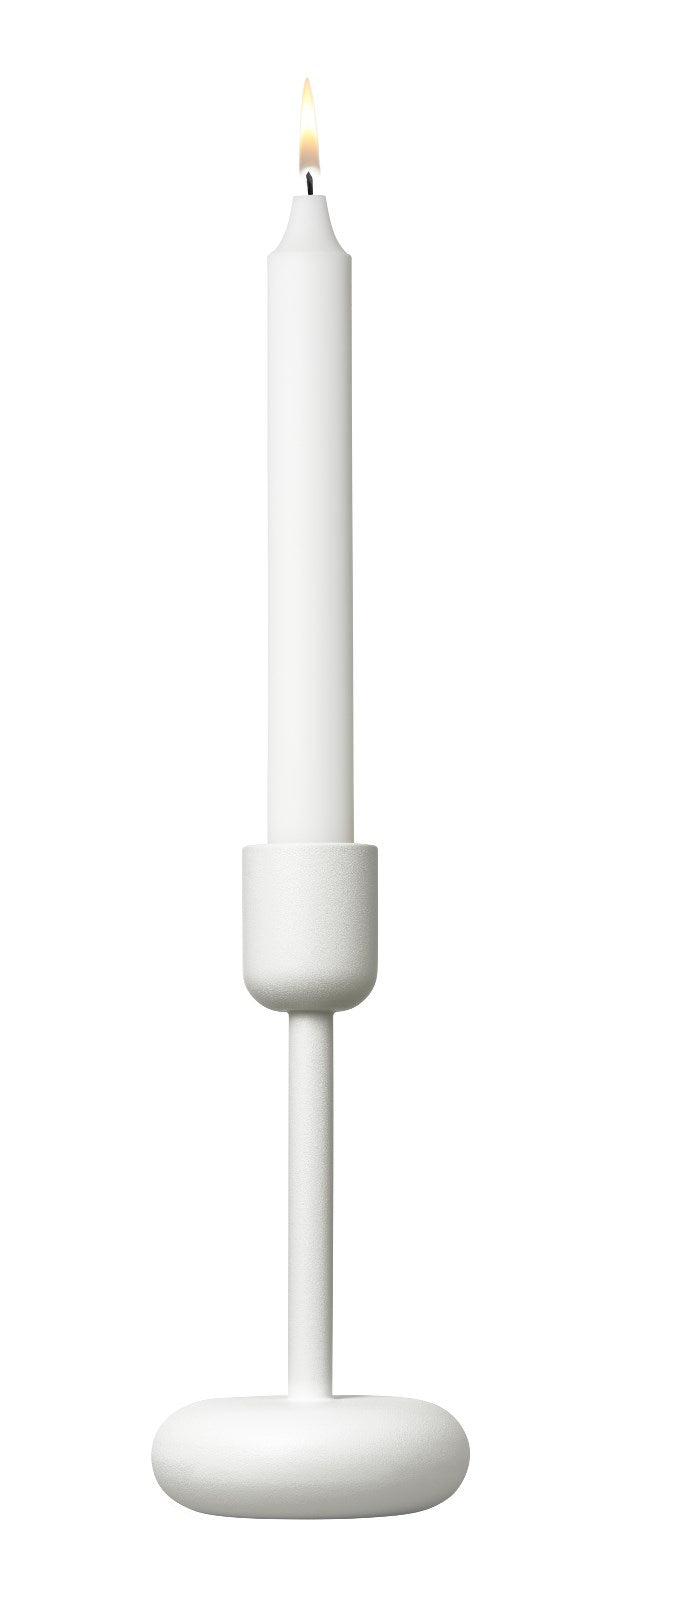 media image for Nappula Candleholder in Various Sizes & Colors design by Matti Klenell for Iittala 266